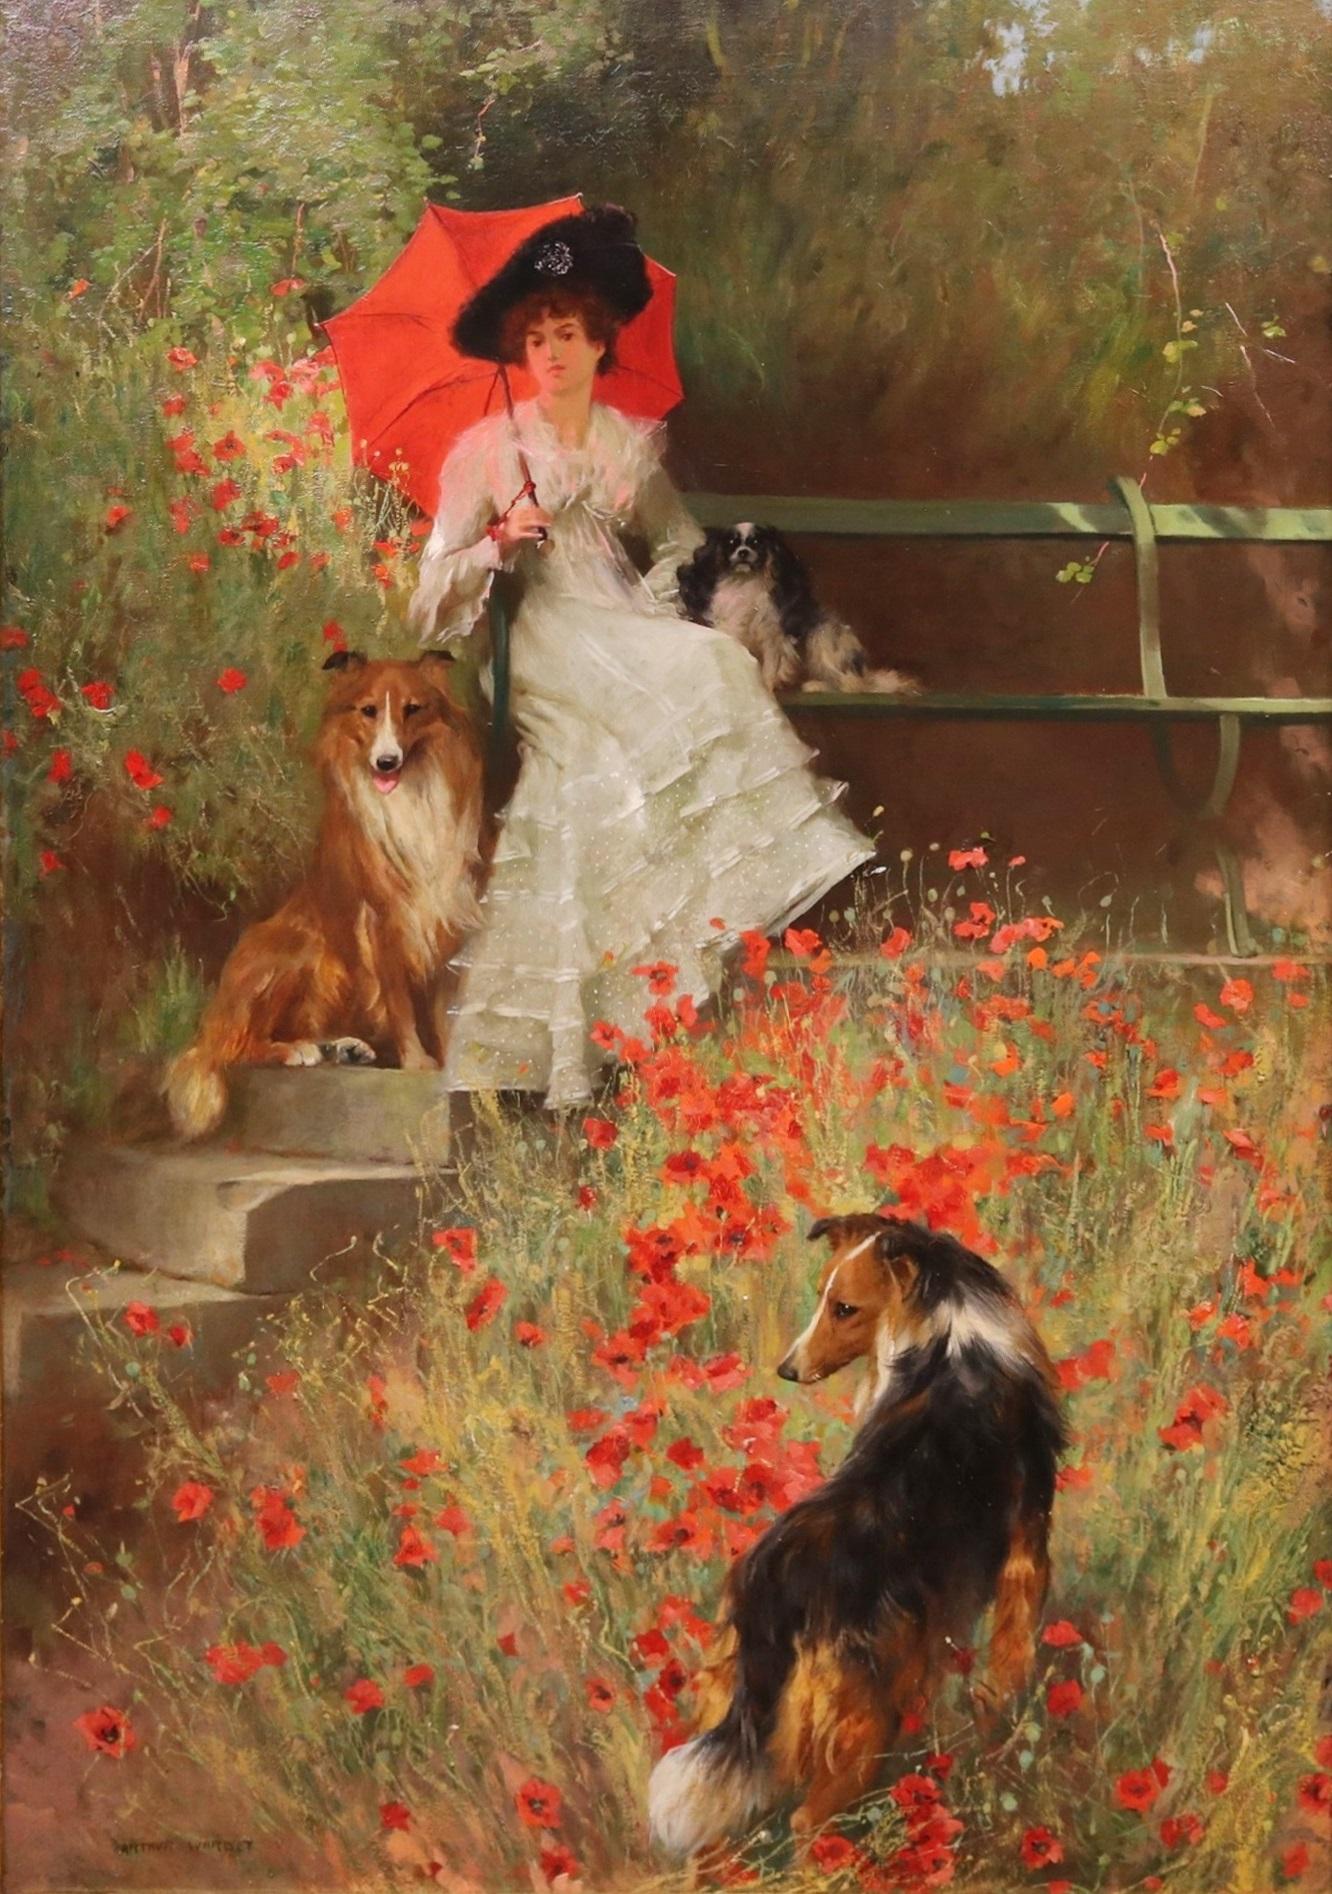 ‘Vigilance, Loyalty, and Devotion’ by Arthur Wardle R.B.C. R.I. (1864-1949).

The painting – which depicts a young Edwardian beauty with parasol surrounded by poppies and three faithful canine companions – is signed by the artist and hangs in a fine